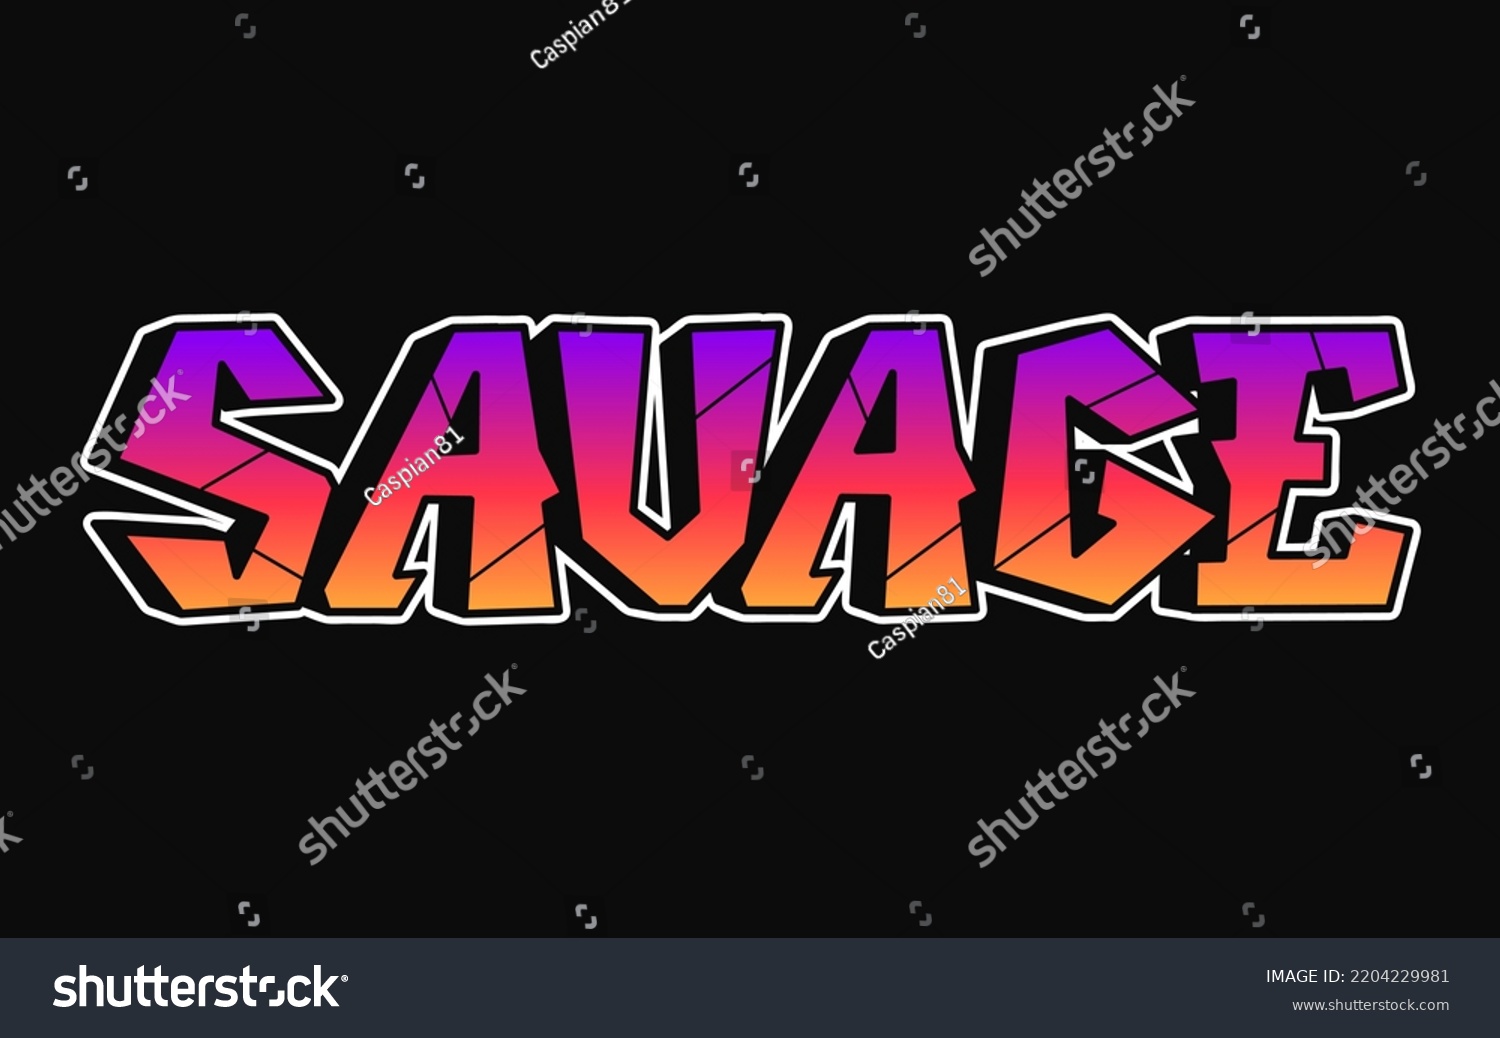 Savage Quotegraffiti Letters Print Postertshirtteelogosticker Concept ...